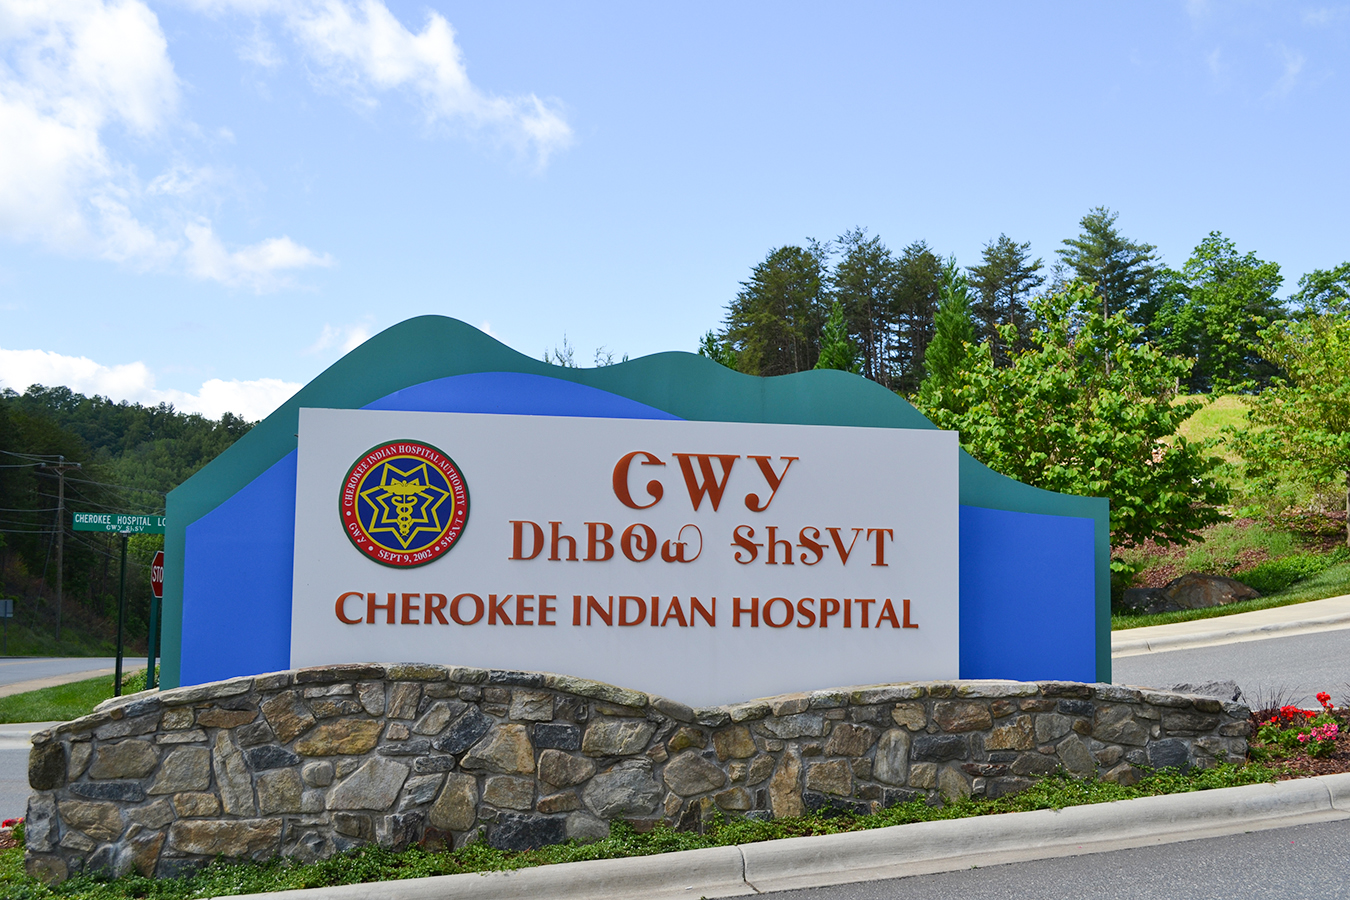 What special benefits do you get for being Cherokee?